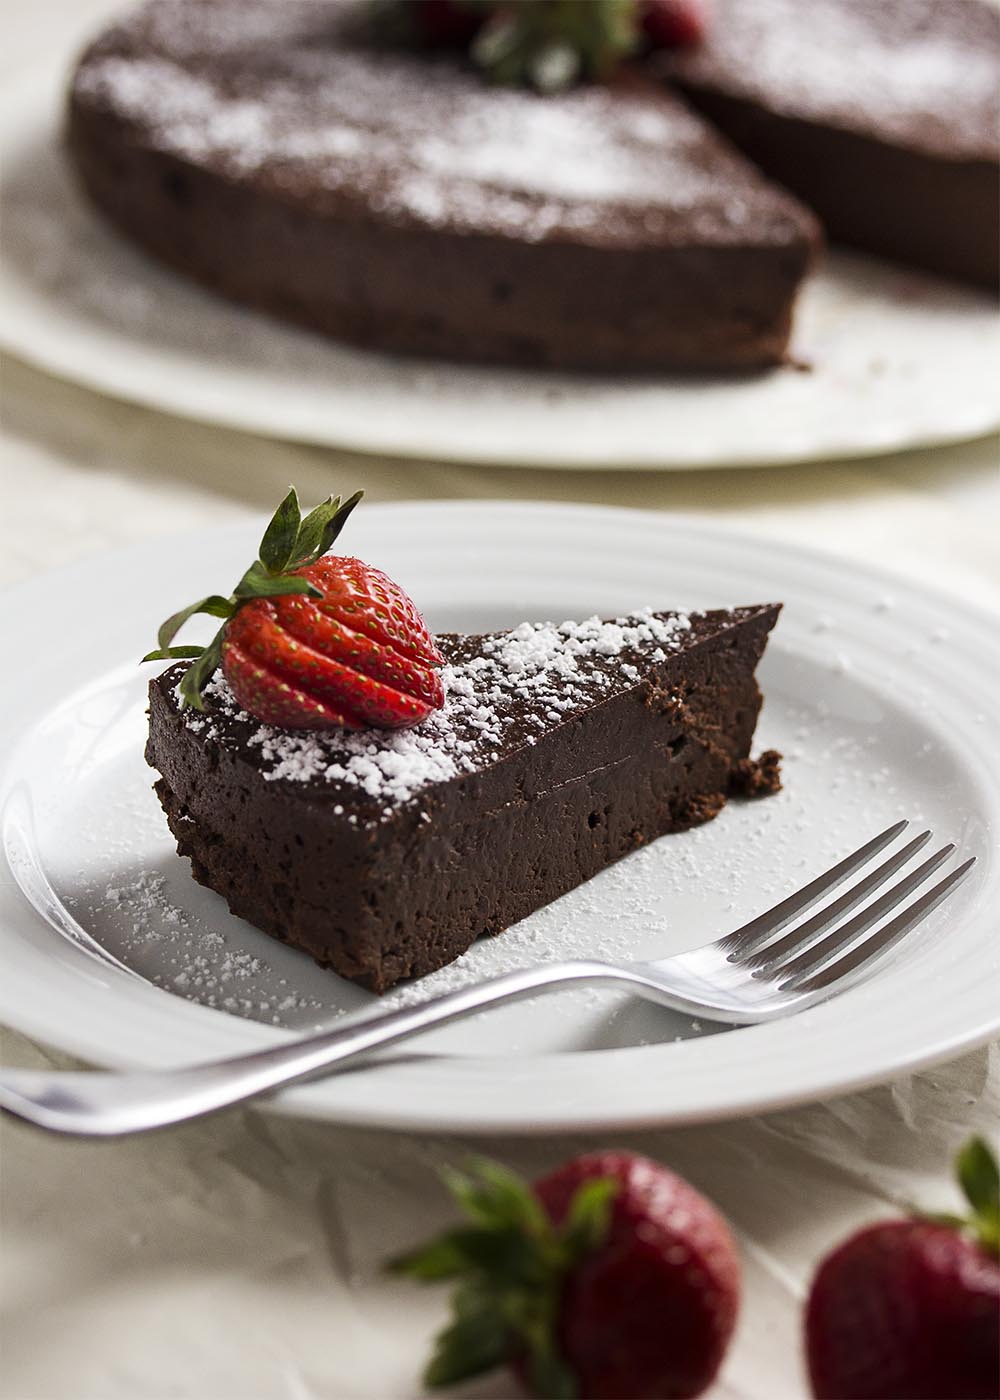 This easy flourless chocolate cake is amazingly dense, rich and decadent. Every bite is packed with intense bittersweet chocolate flavor. | justalittlebitofbacon.com